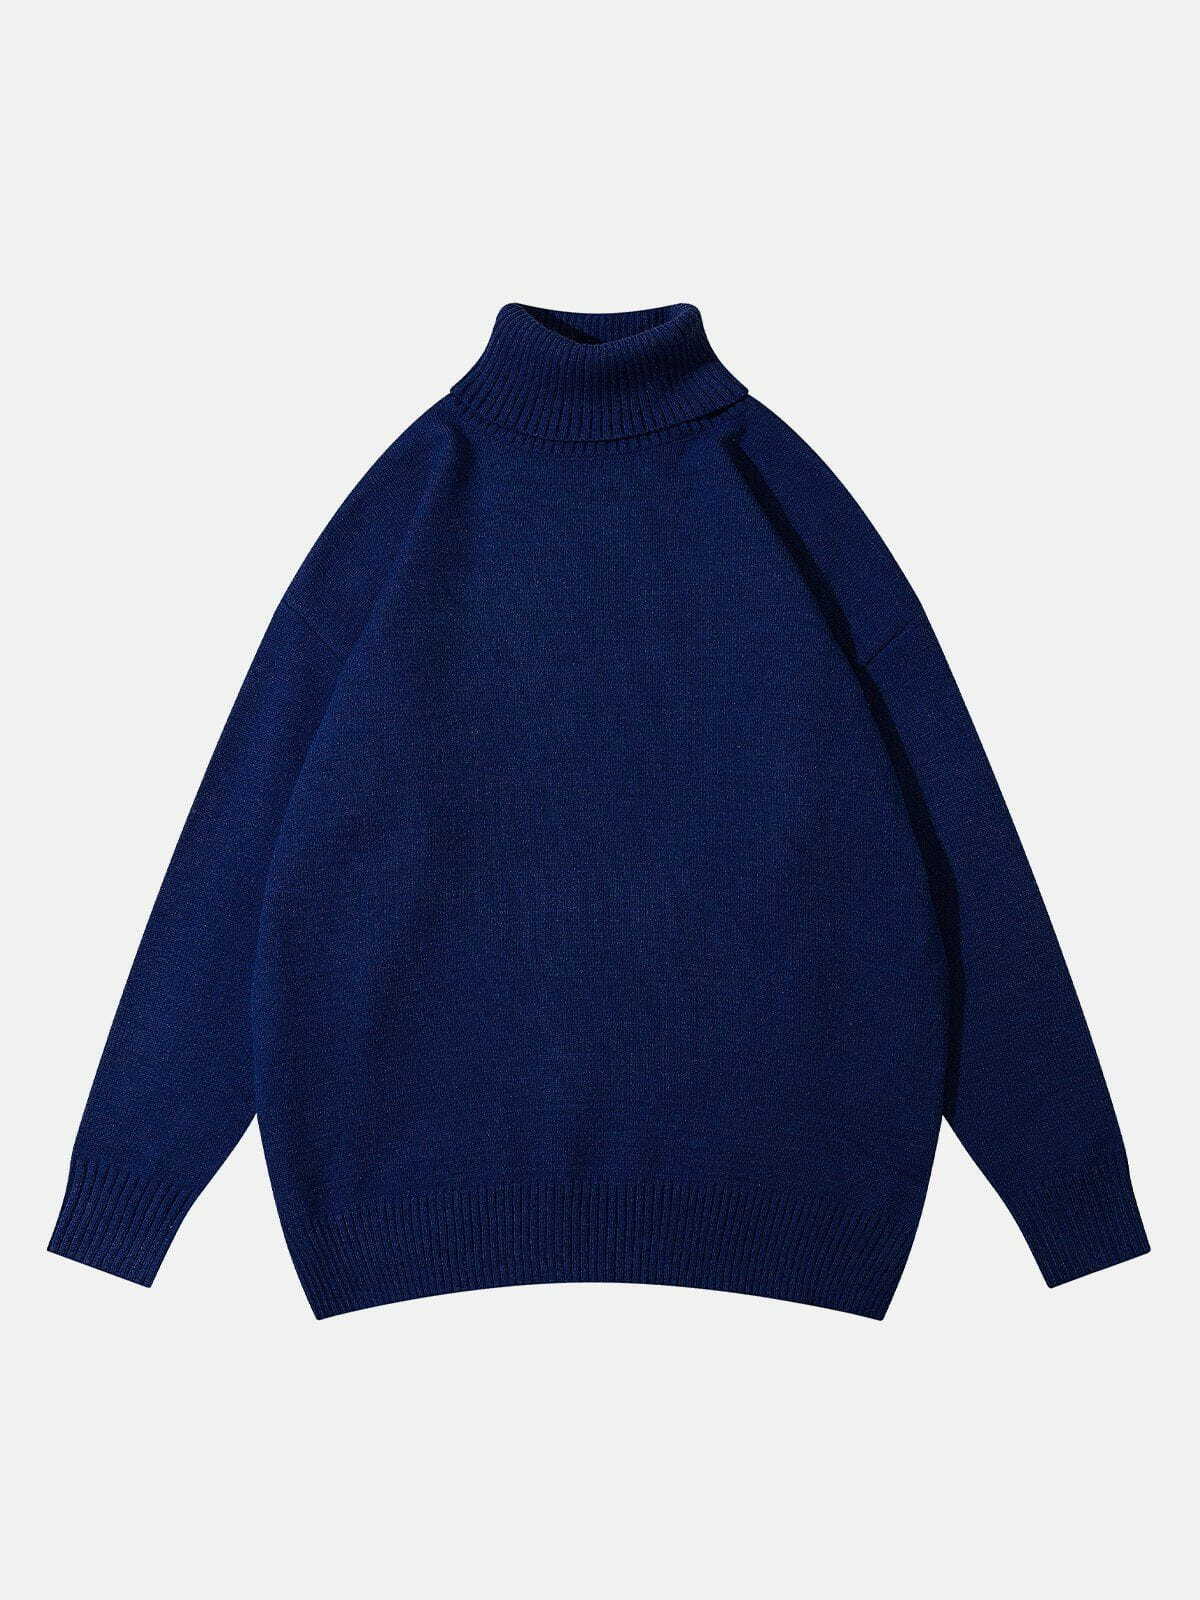 trendy solid turtleneck sweater y2k fashion musthave 5188